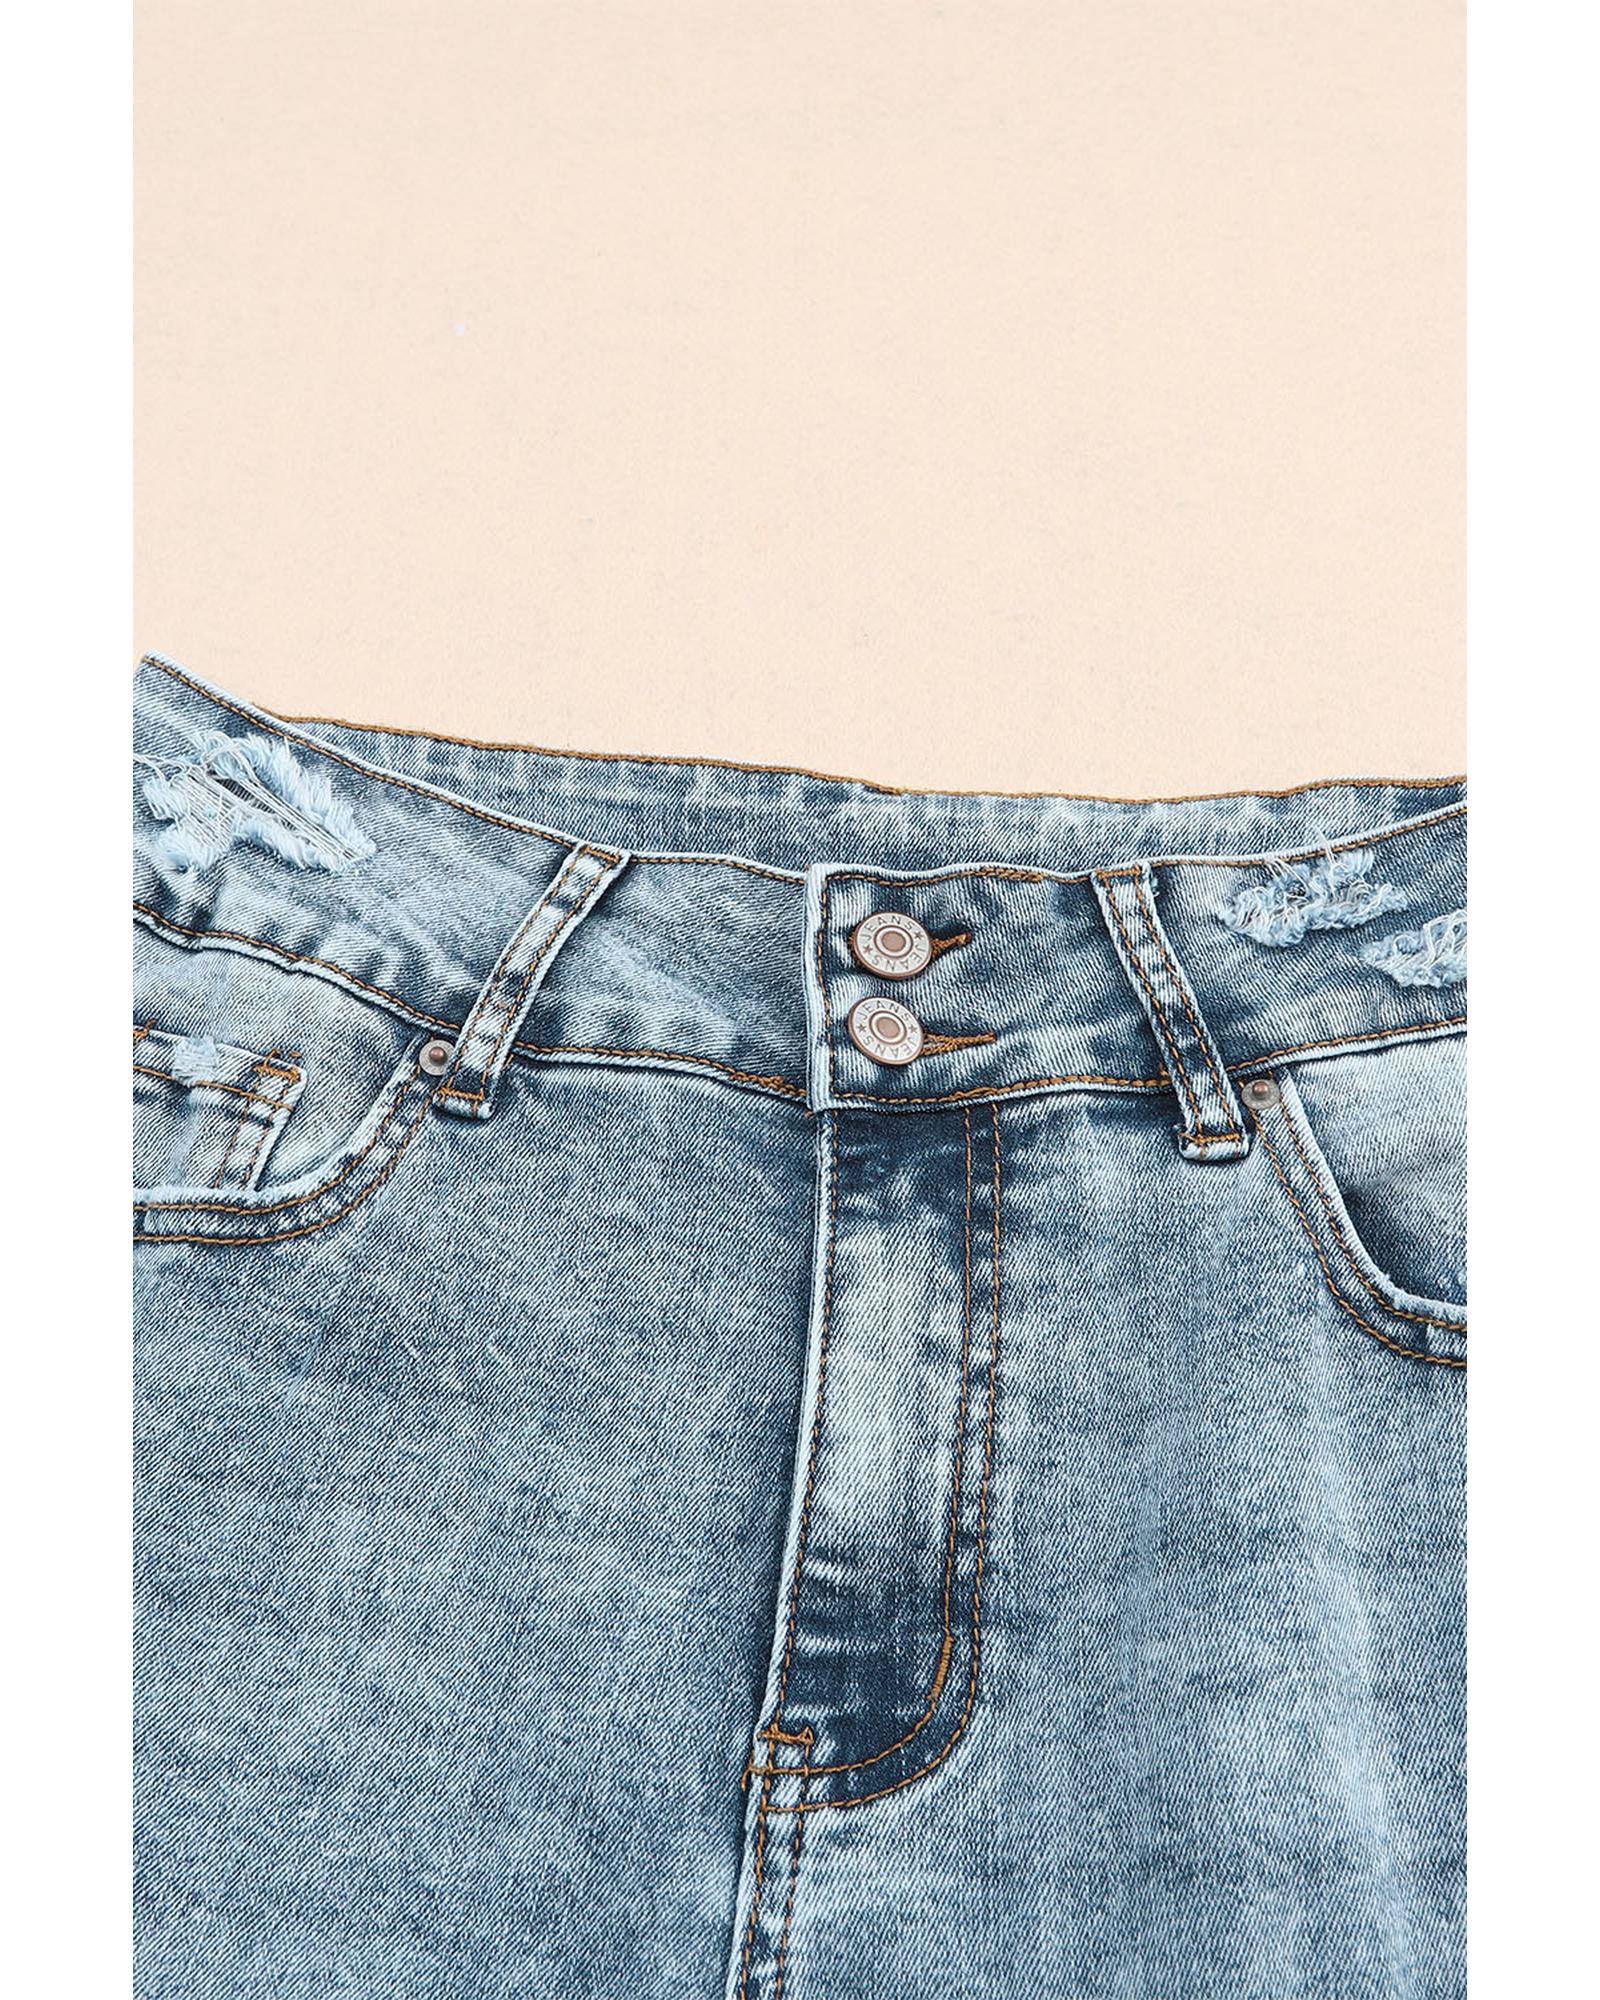 Azura Exchange Ripped Detail Flare Bottom Jeans - 10 US